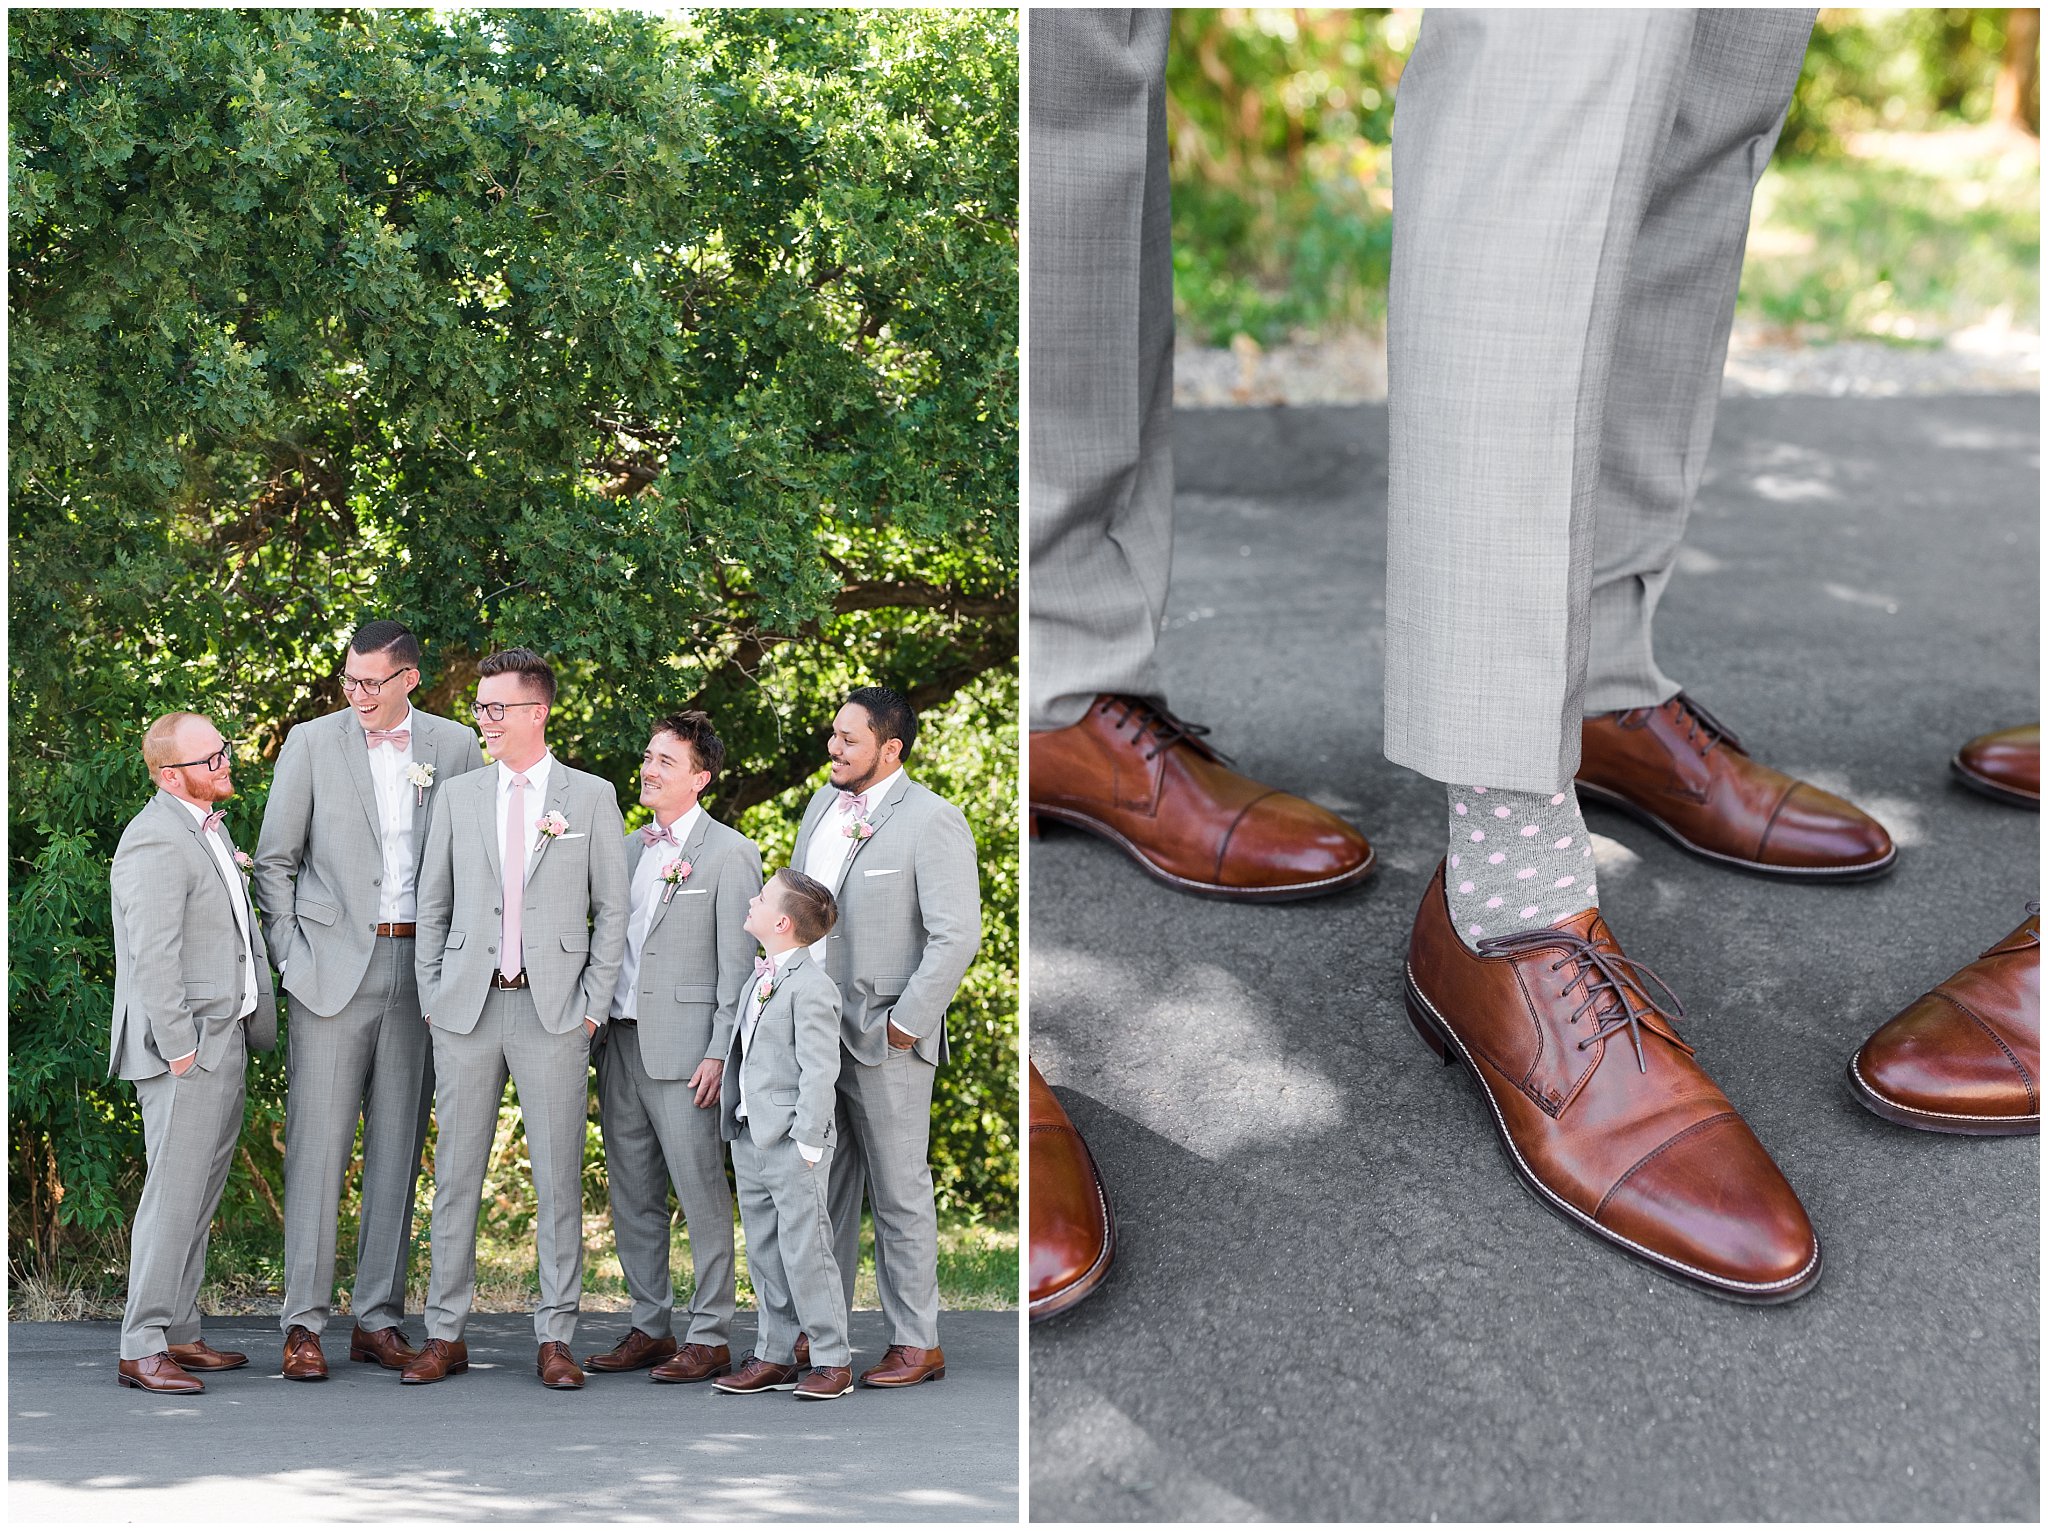 Groomsmen in gray suits and gray socks with pink polka dots | Oak Hills Utah Dusty Rose and Gray Summer Wedding | Jessie and Dallin Photography